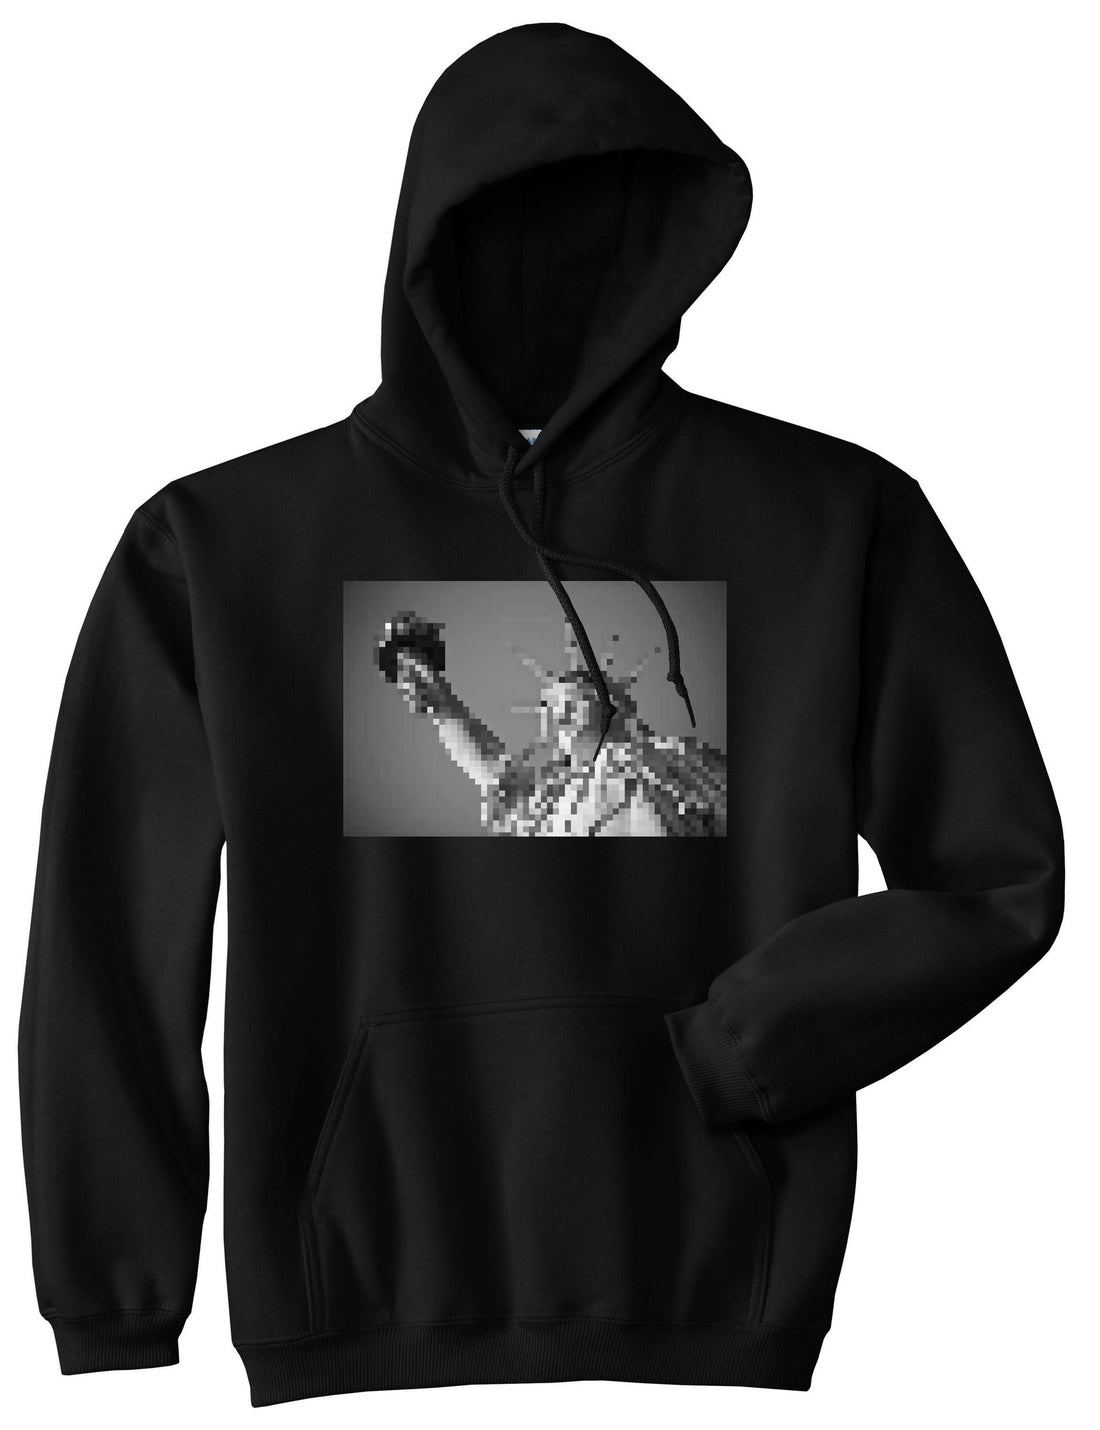 Statue Of Liberty Pixelated Boys Kids Pullover Hoodie Hoody in Black by Kings Of NY